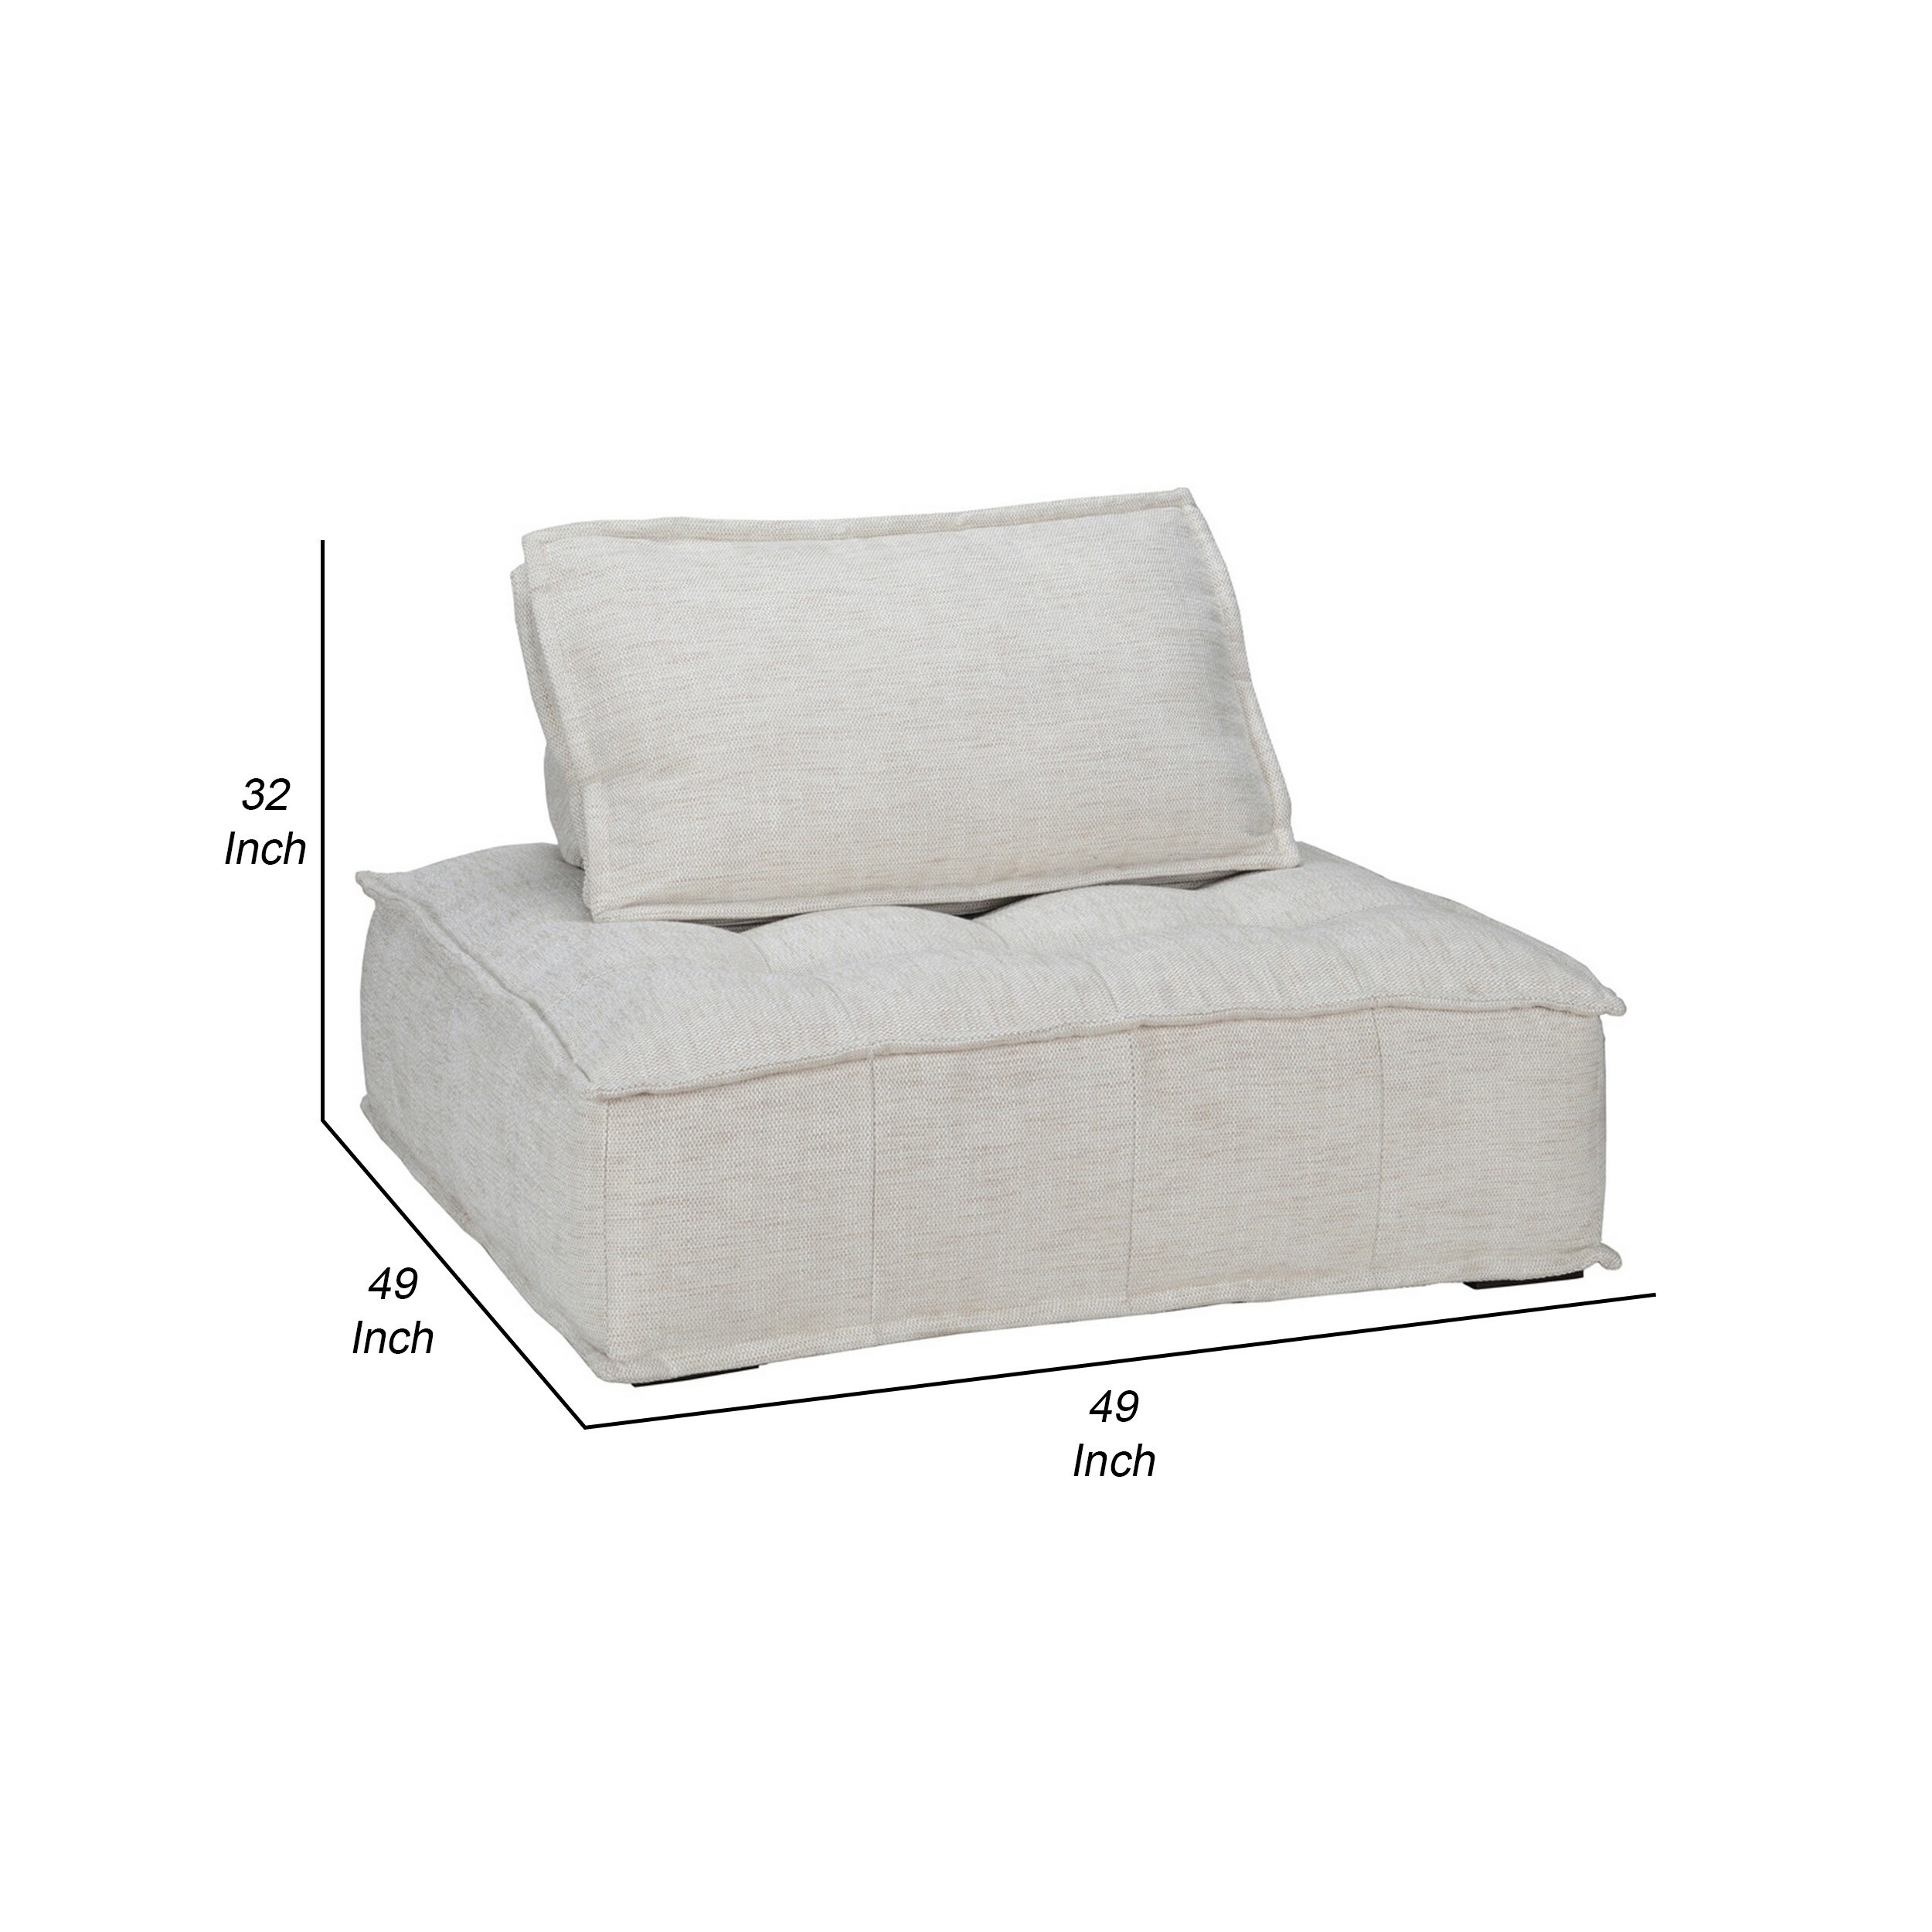 Yom 49 Inch Lounge Chair, Tufted Seat, Cushioned Back, Piped Edges, Beige